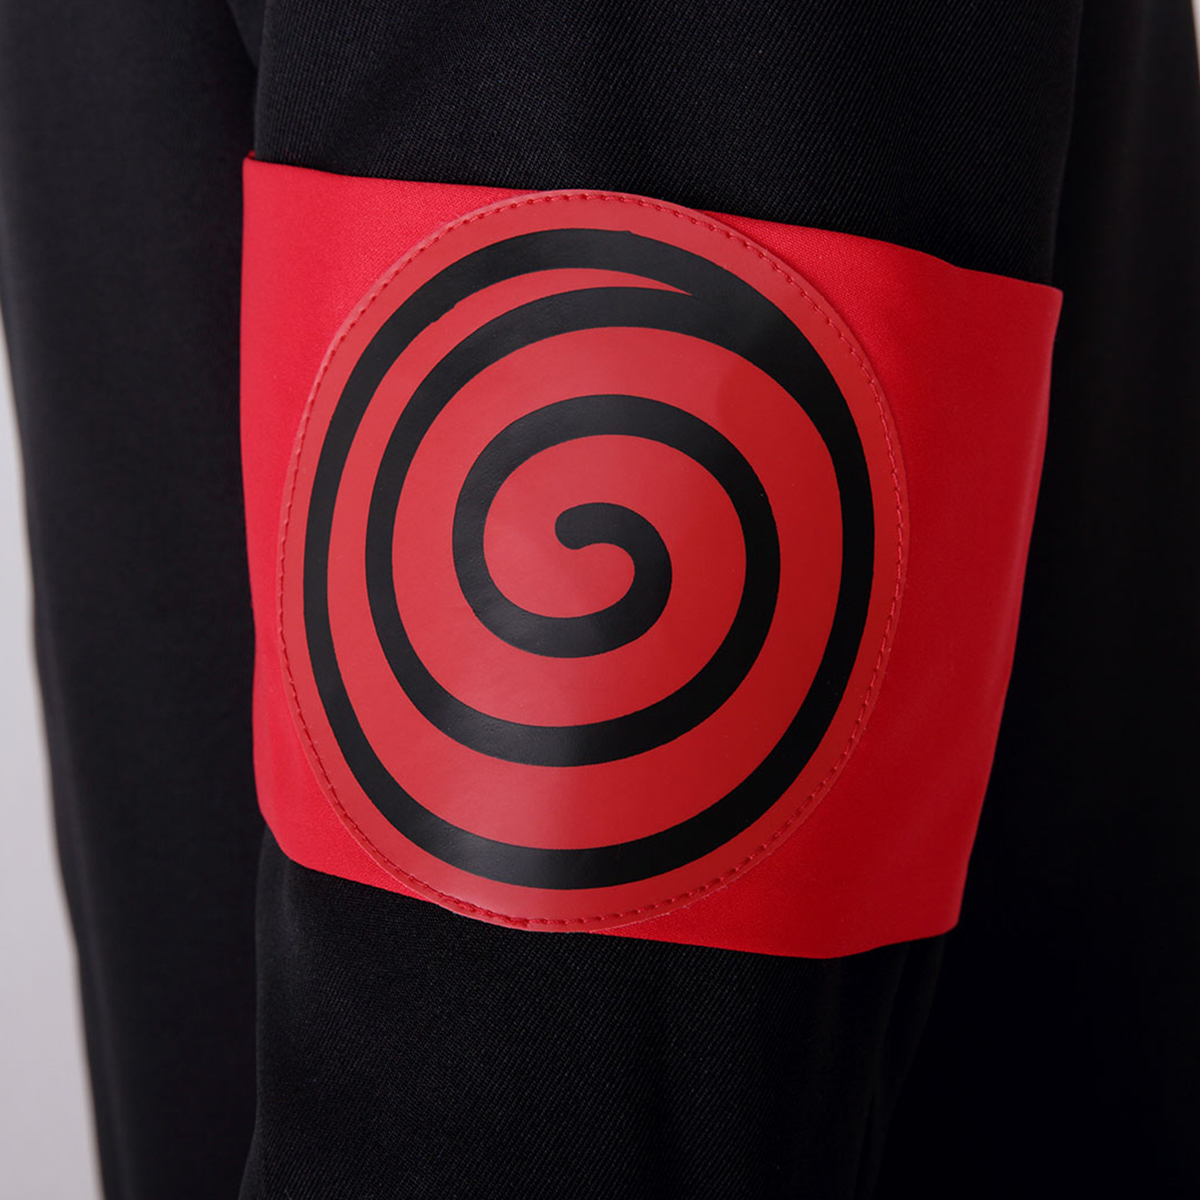 Naruto The Last Naruto 8 Cosplay Costumes New Zealand Online Store